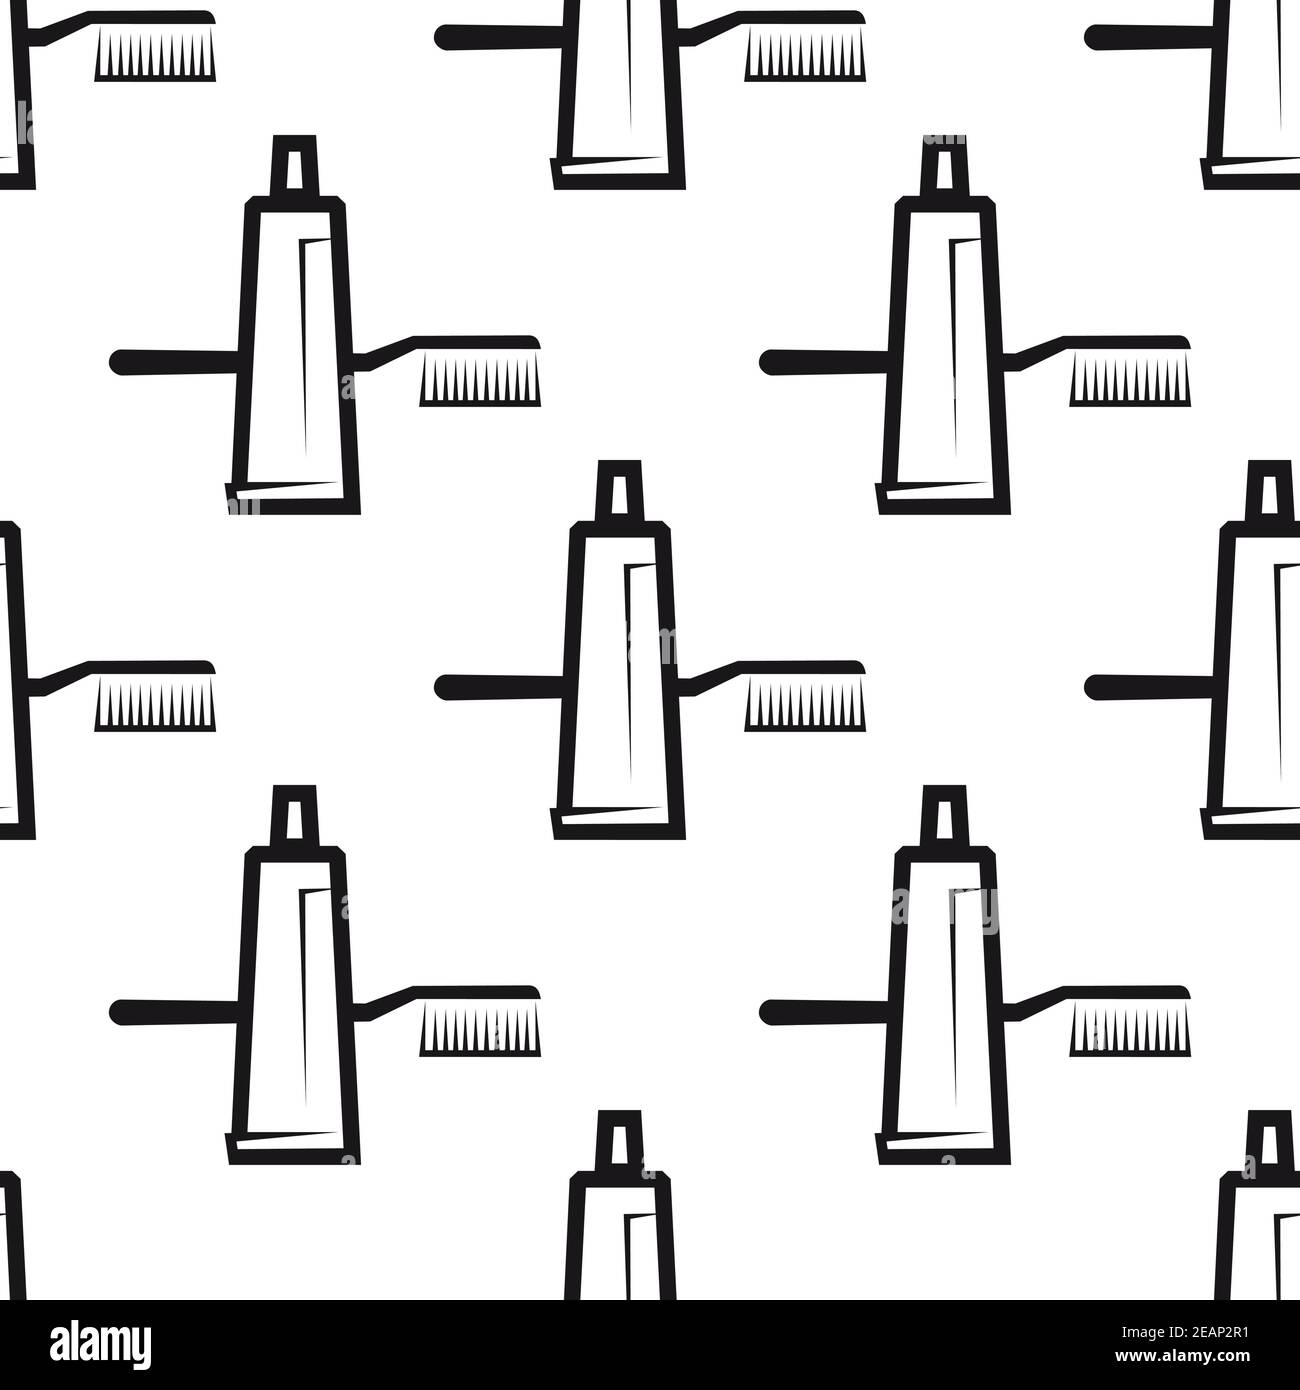 Seamless background pattern of toothpaste tube and tooth brush, for dental hygiene, health care and medicine design Stock Vector